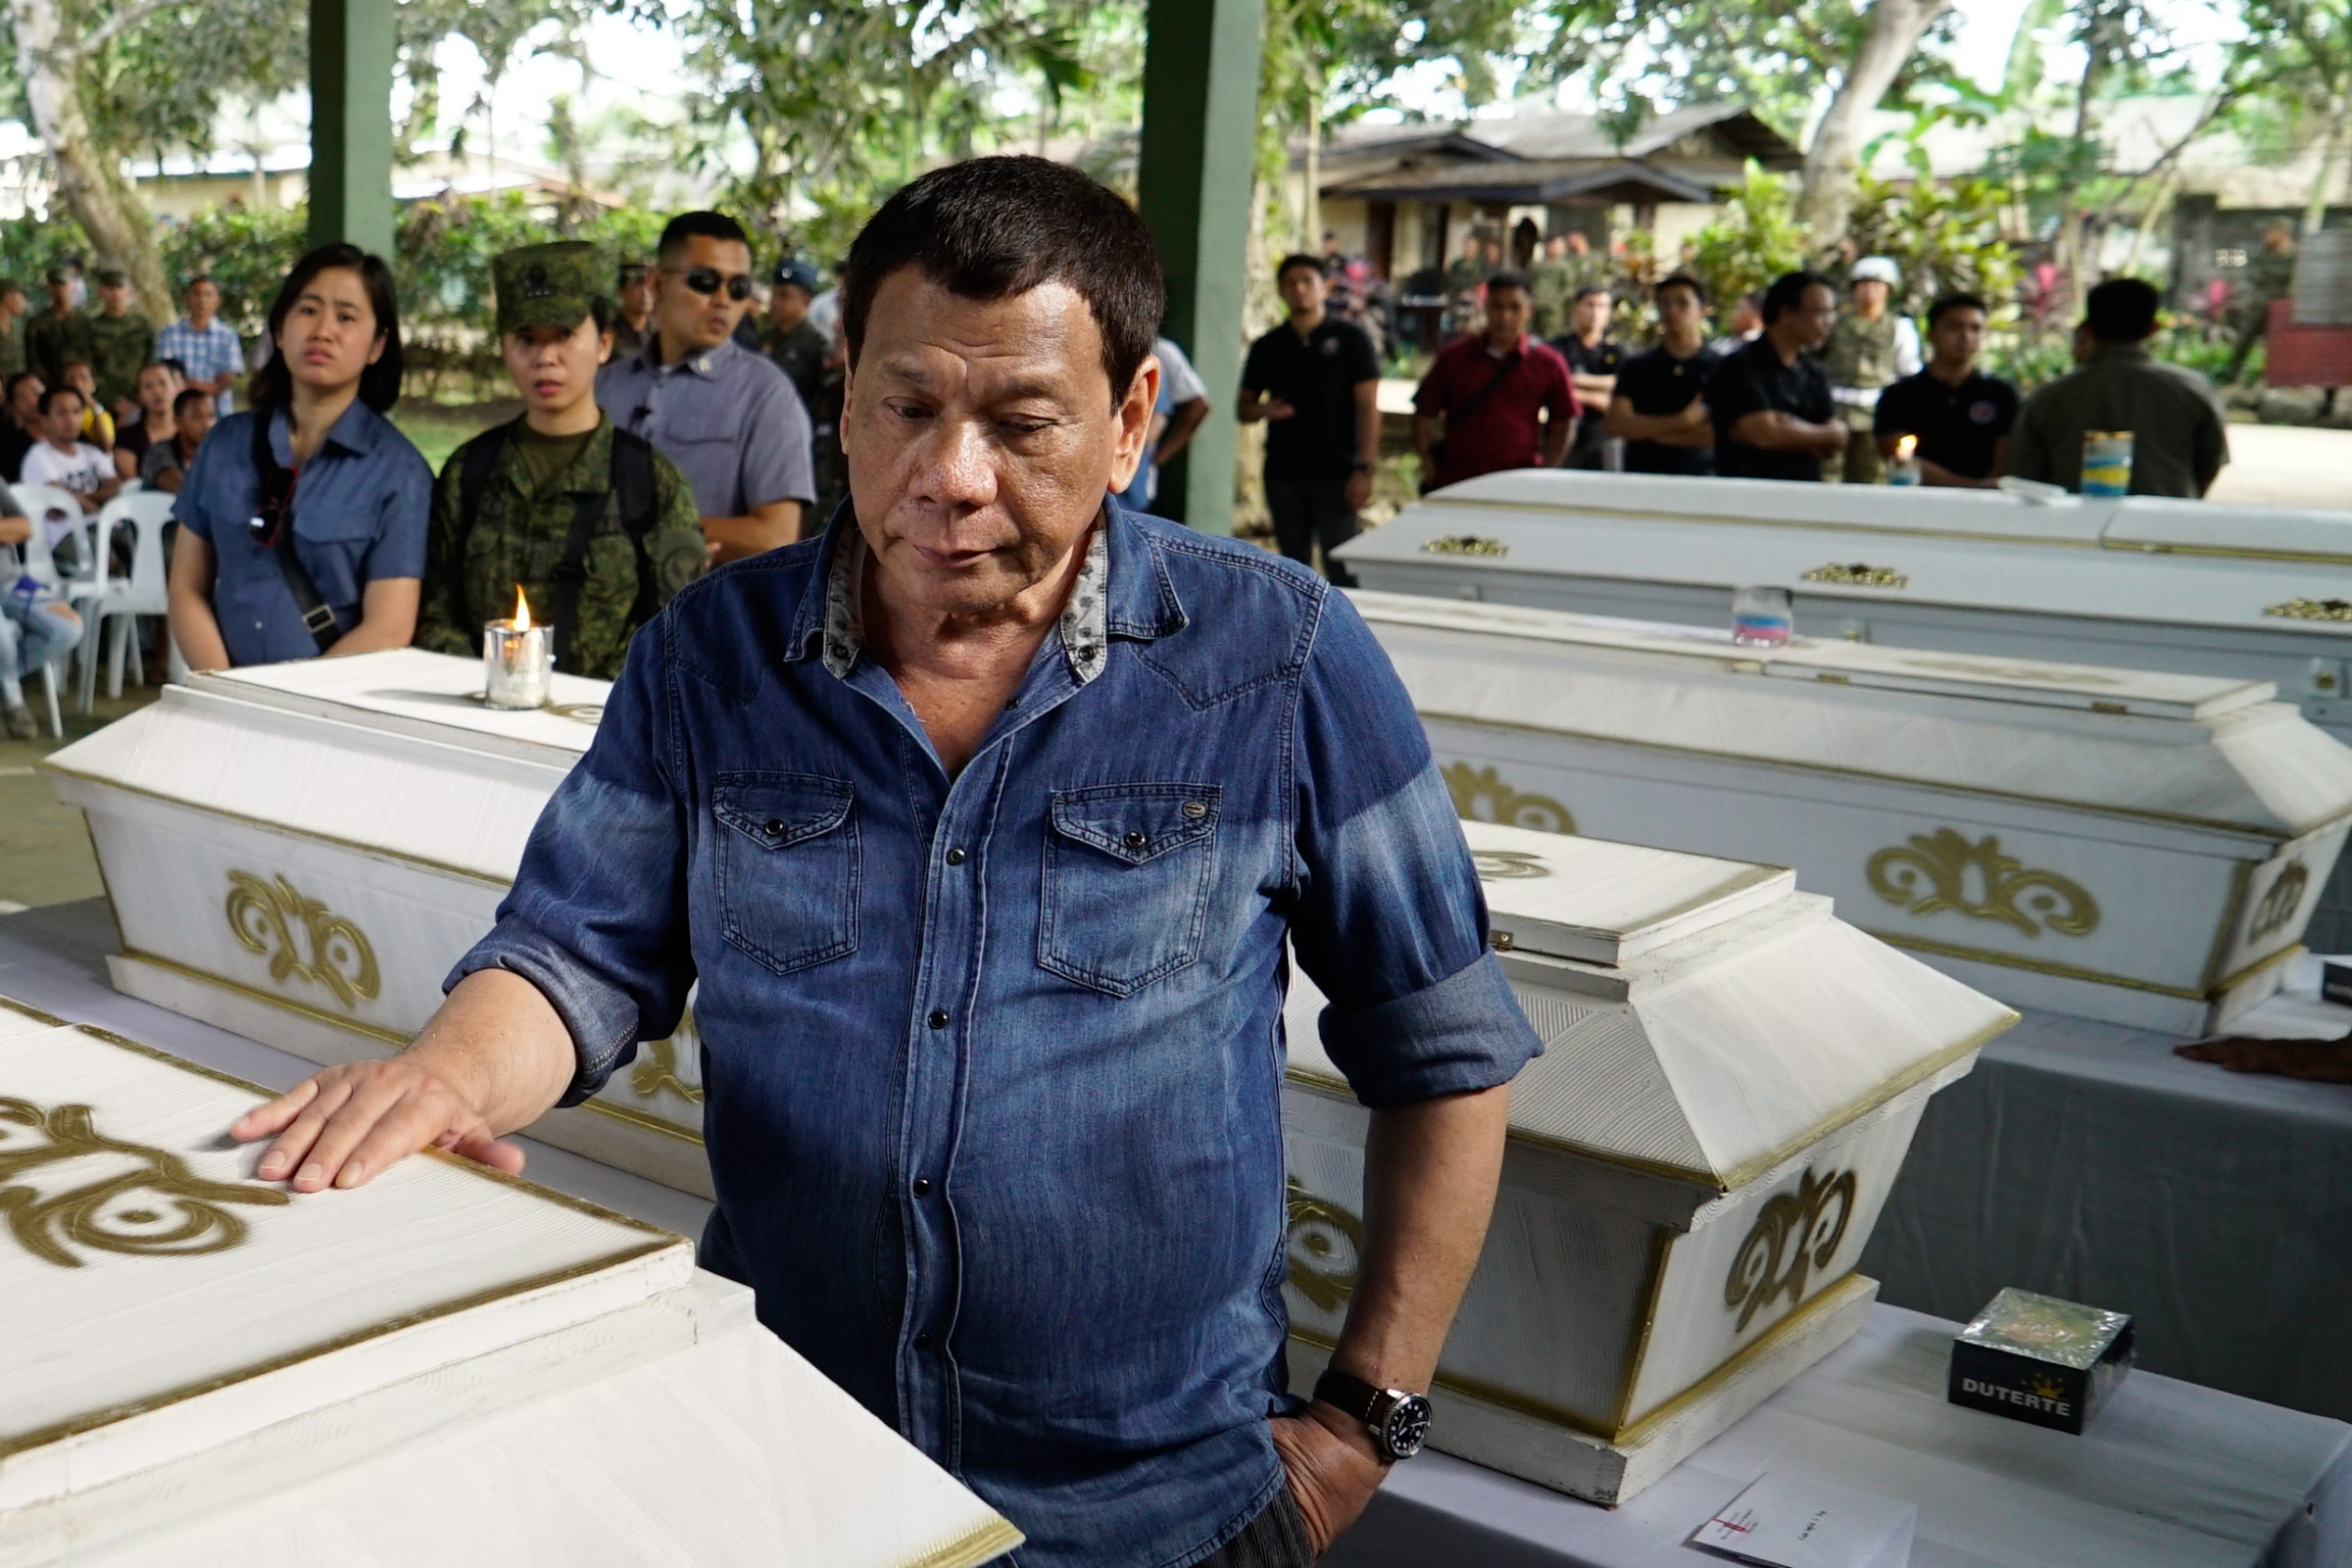 CONDOLENCES. President Rodrigo Duterte pays his last respects to one of the victims who died during the twin blasts at the Cathedral of Our Lady of Mount Carmel in Jolo, Sulu, as he visits Camp Teodulfo Bautista on January 28, 2019. Malacañang photo 